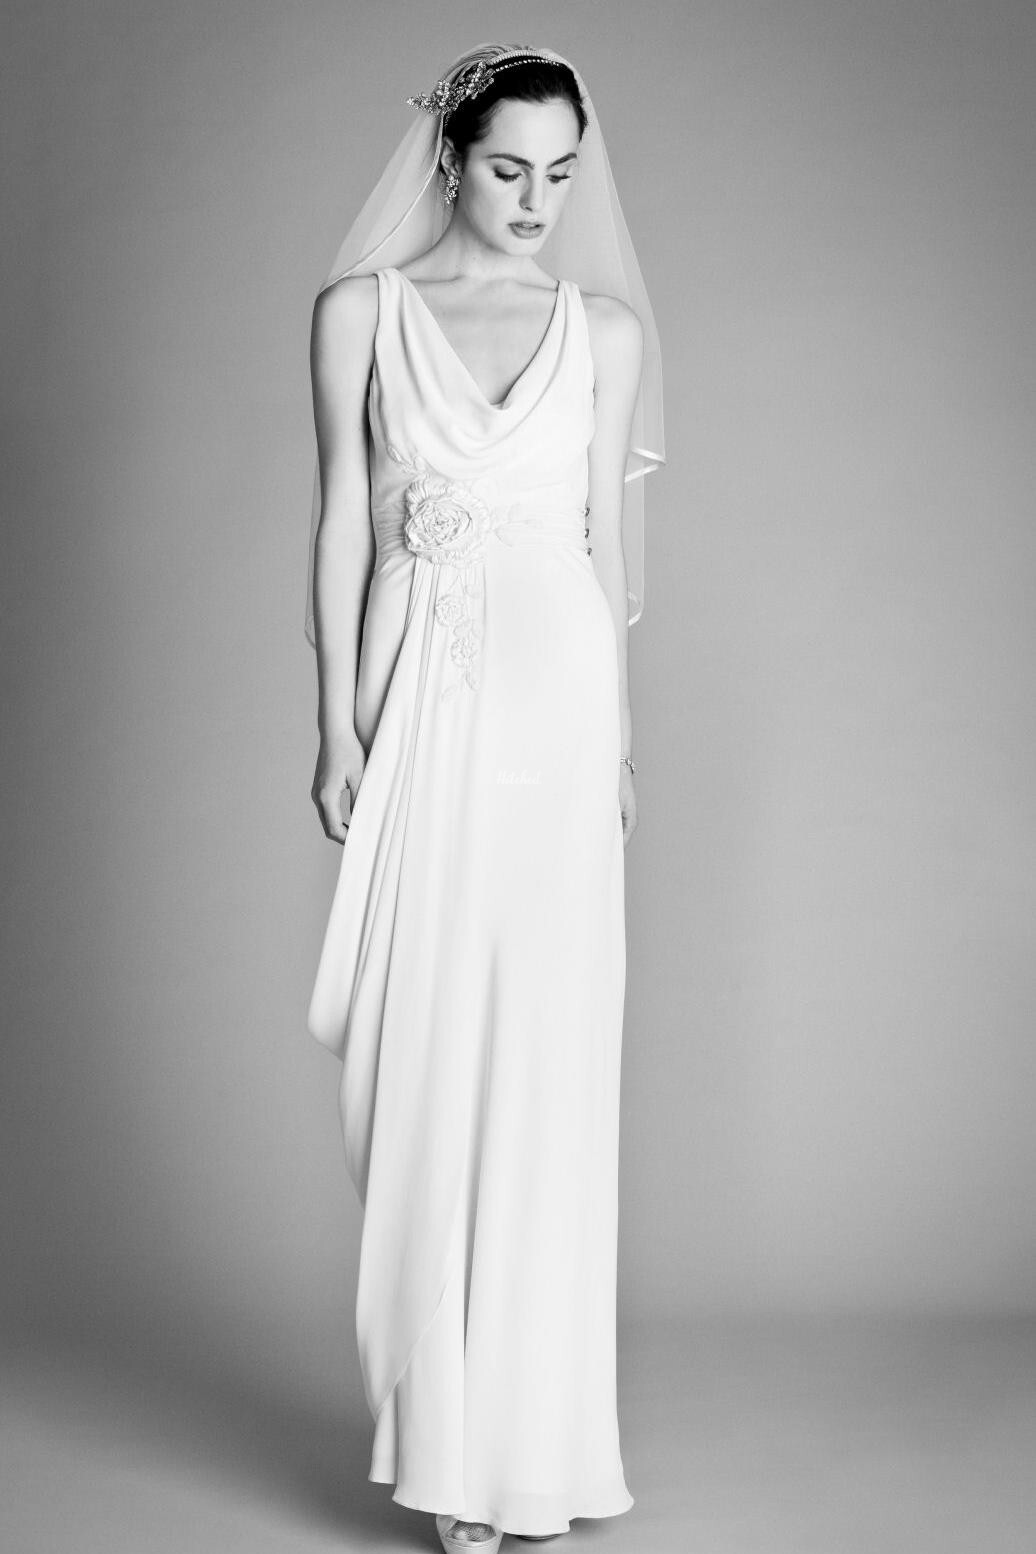 Chloe Wedding Dress from Temperley London - hitched.co.uk